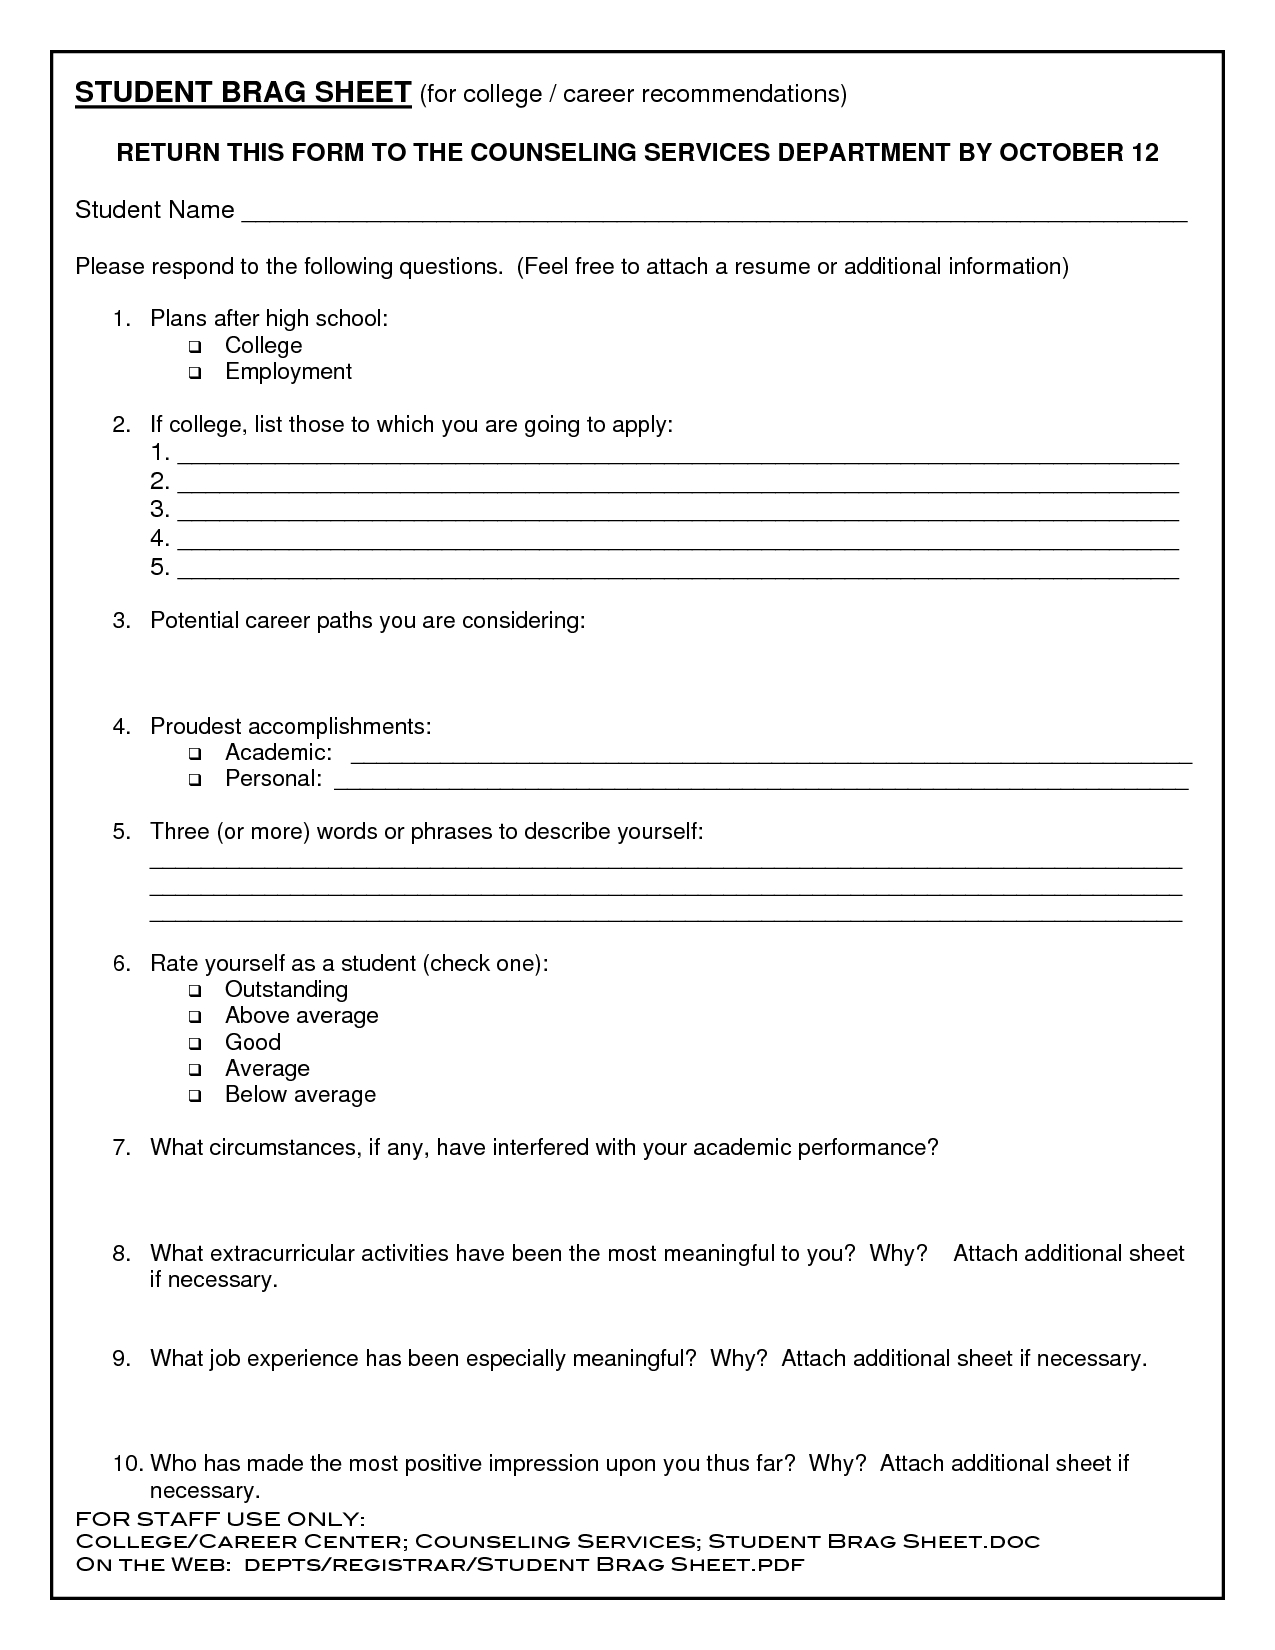 Blank Resume Templates For High School Students | Education - Printable Career Interest Survey For High School Students Free